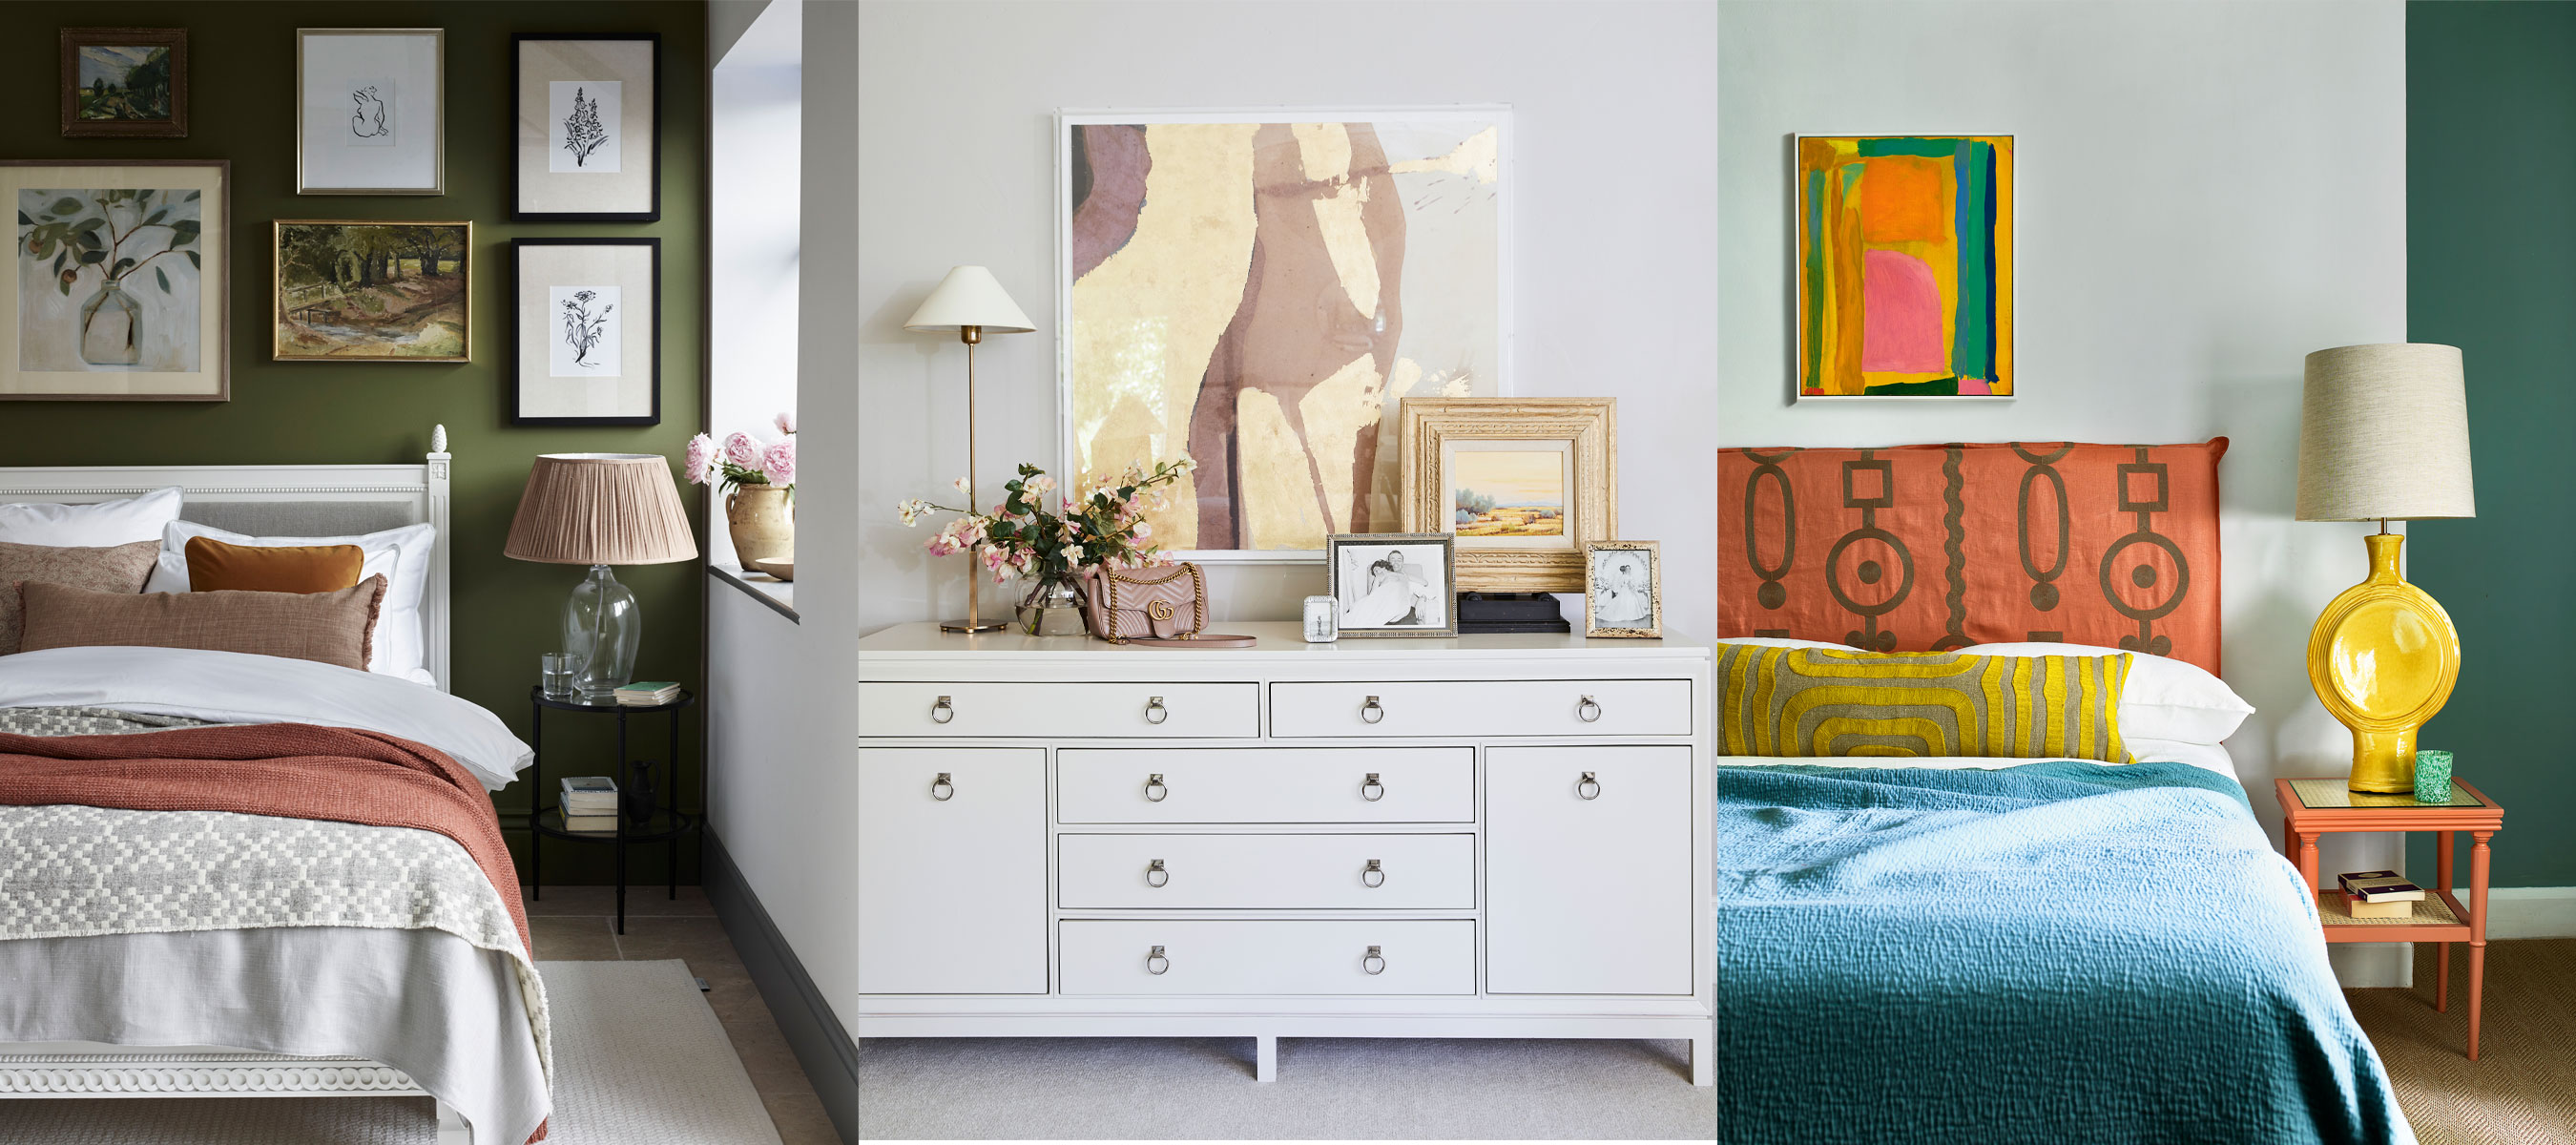 The Best Museum-Inspired Home Decor for an Artsy Space | Apartment Therapy